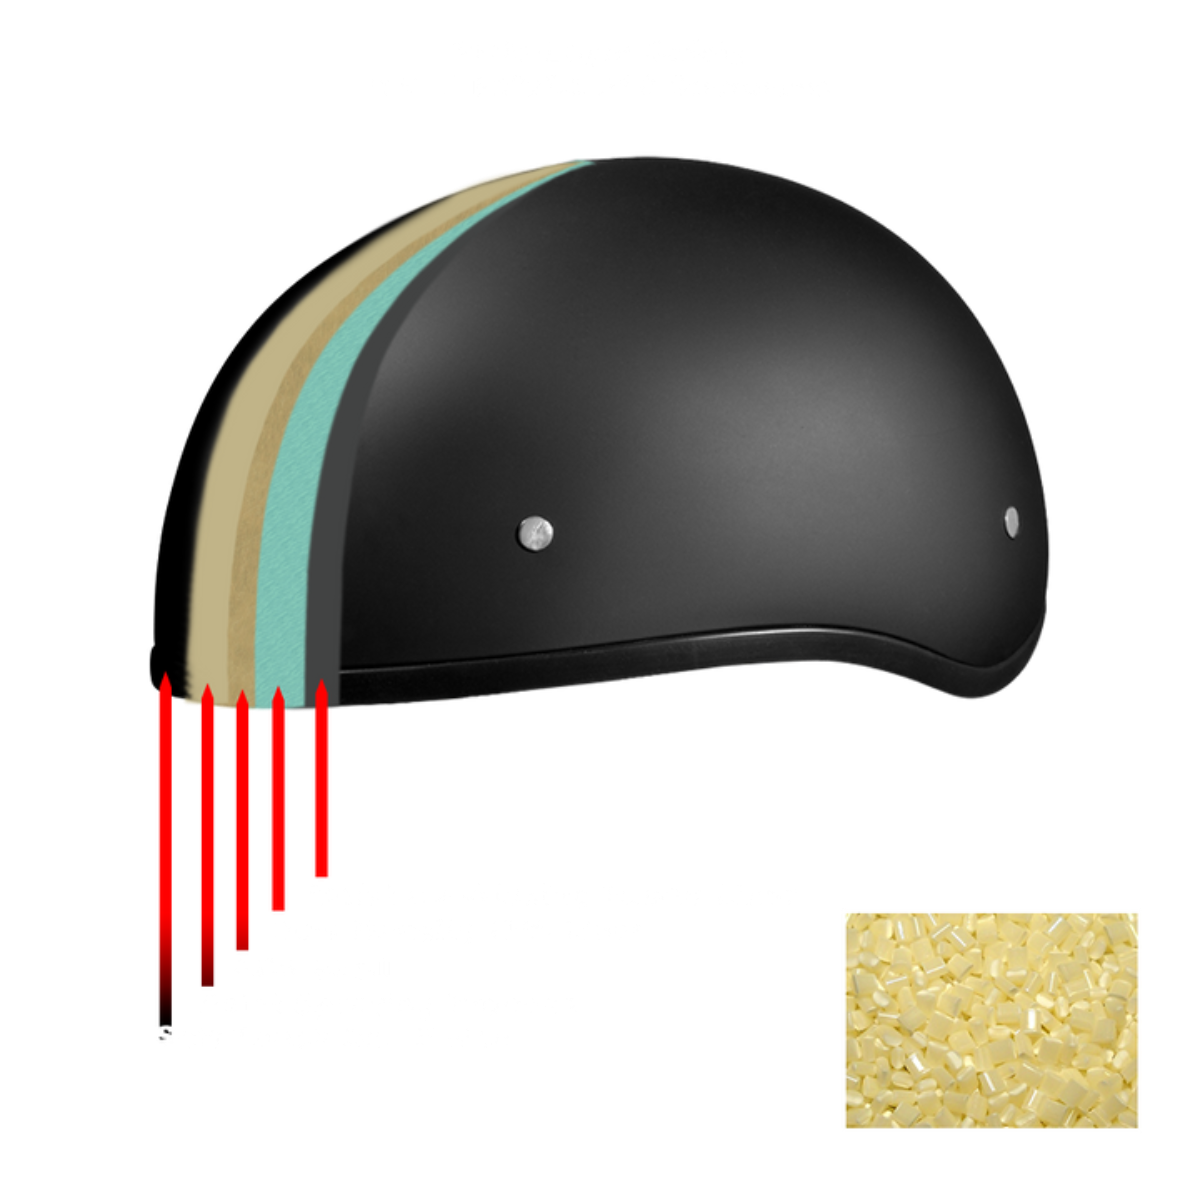 Illustration of a Daytona D.O.T Skull Cap - w/Wild at Heart Helmet with cross-sectional view showing various layers, including moisture-wicking fabric for safety and comfort.